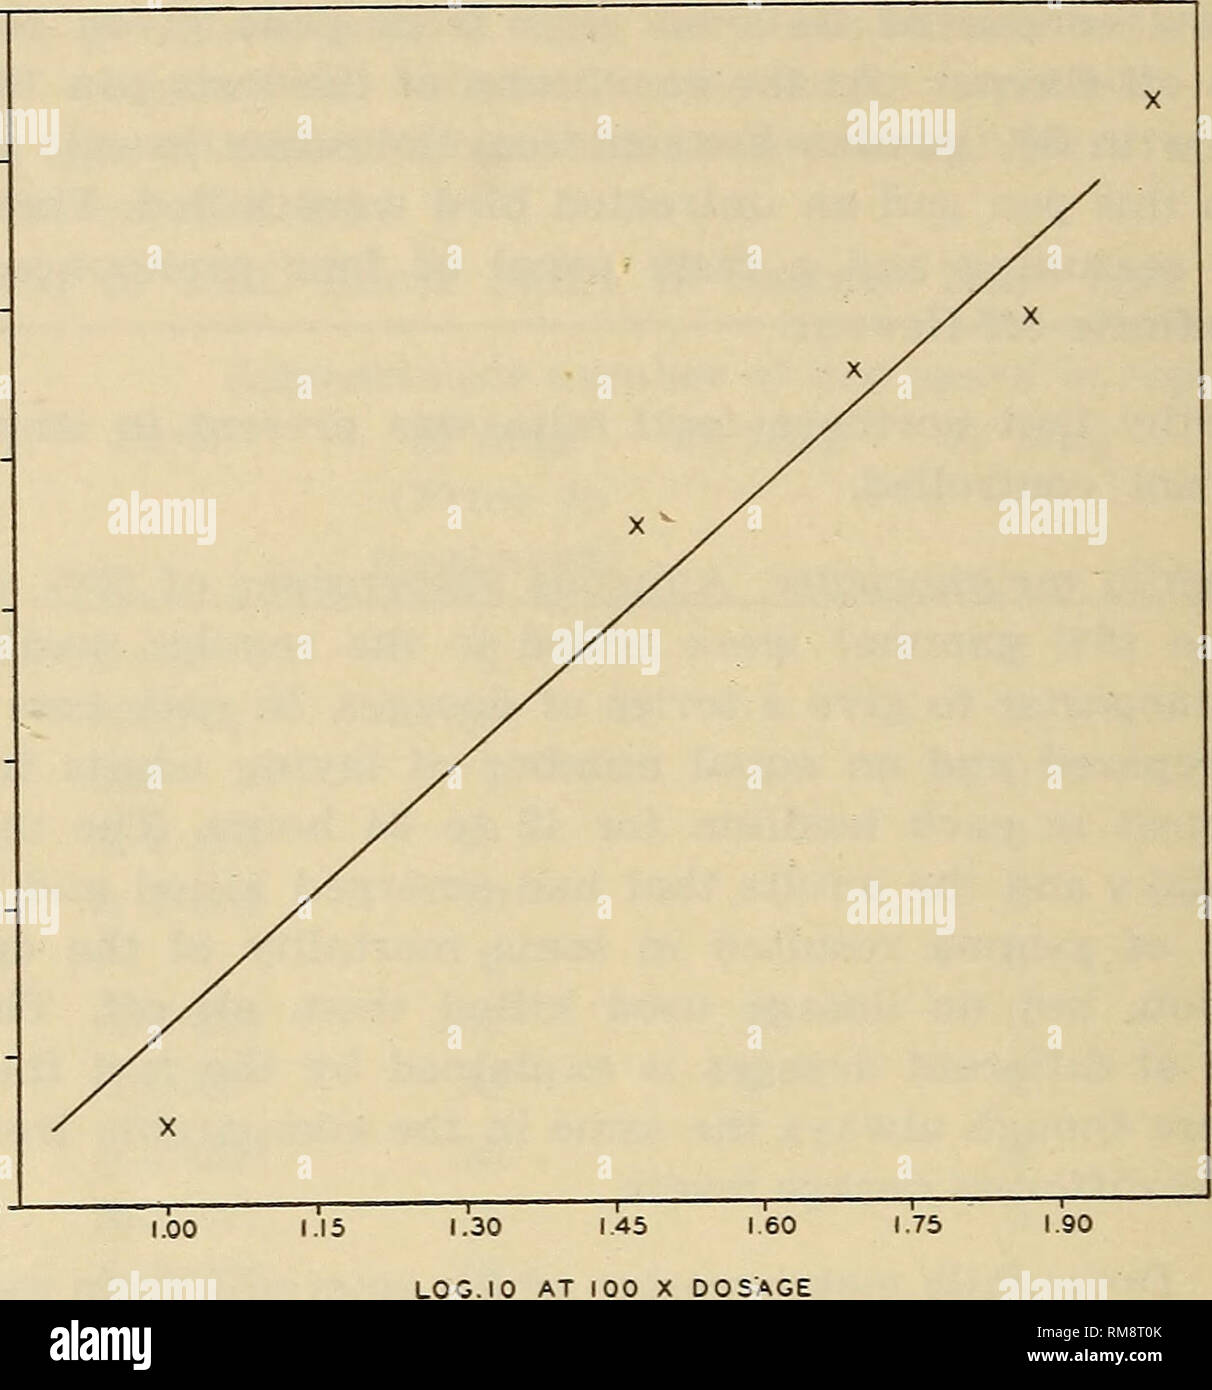 . Annual report. Entomological Society of Ontario; Insect pests; Insects. 56 REPORT OF THE ENTOMOLOGICAL. Fig. I—Mortality of Aedes aegypti larvae exposed to gamma hexachlorocyclohexane for eighteen hours. (Corrected for check mortality.) Average percentage mortality of Aedes aegypti larvae 18 hours after treated with gamma hexachlorocyclohexane Dosage 0 .1 .3 .5 .75 1 p.p.m. p.p.m, p.p.m. p.p.m. p.p.m. p.p.m. Average % mortality 4.7 15.0 51.0 62.3 66.3 81.3 after 18 hours The probit-log dosage regression line fitted to the above data by eye (Fig. I) gives the LD50 as 0.36 p.p.m. of the gamma  Stock Photo